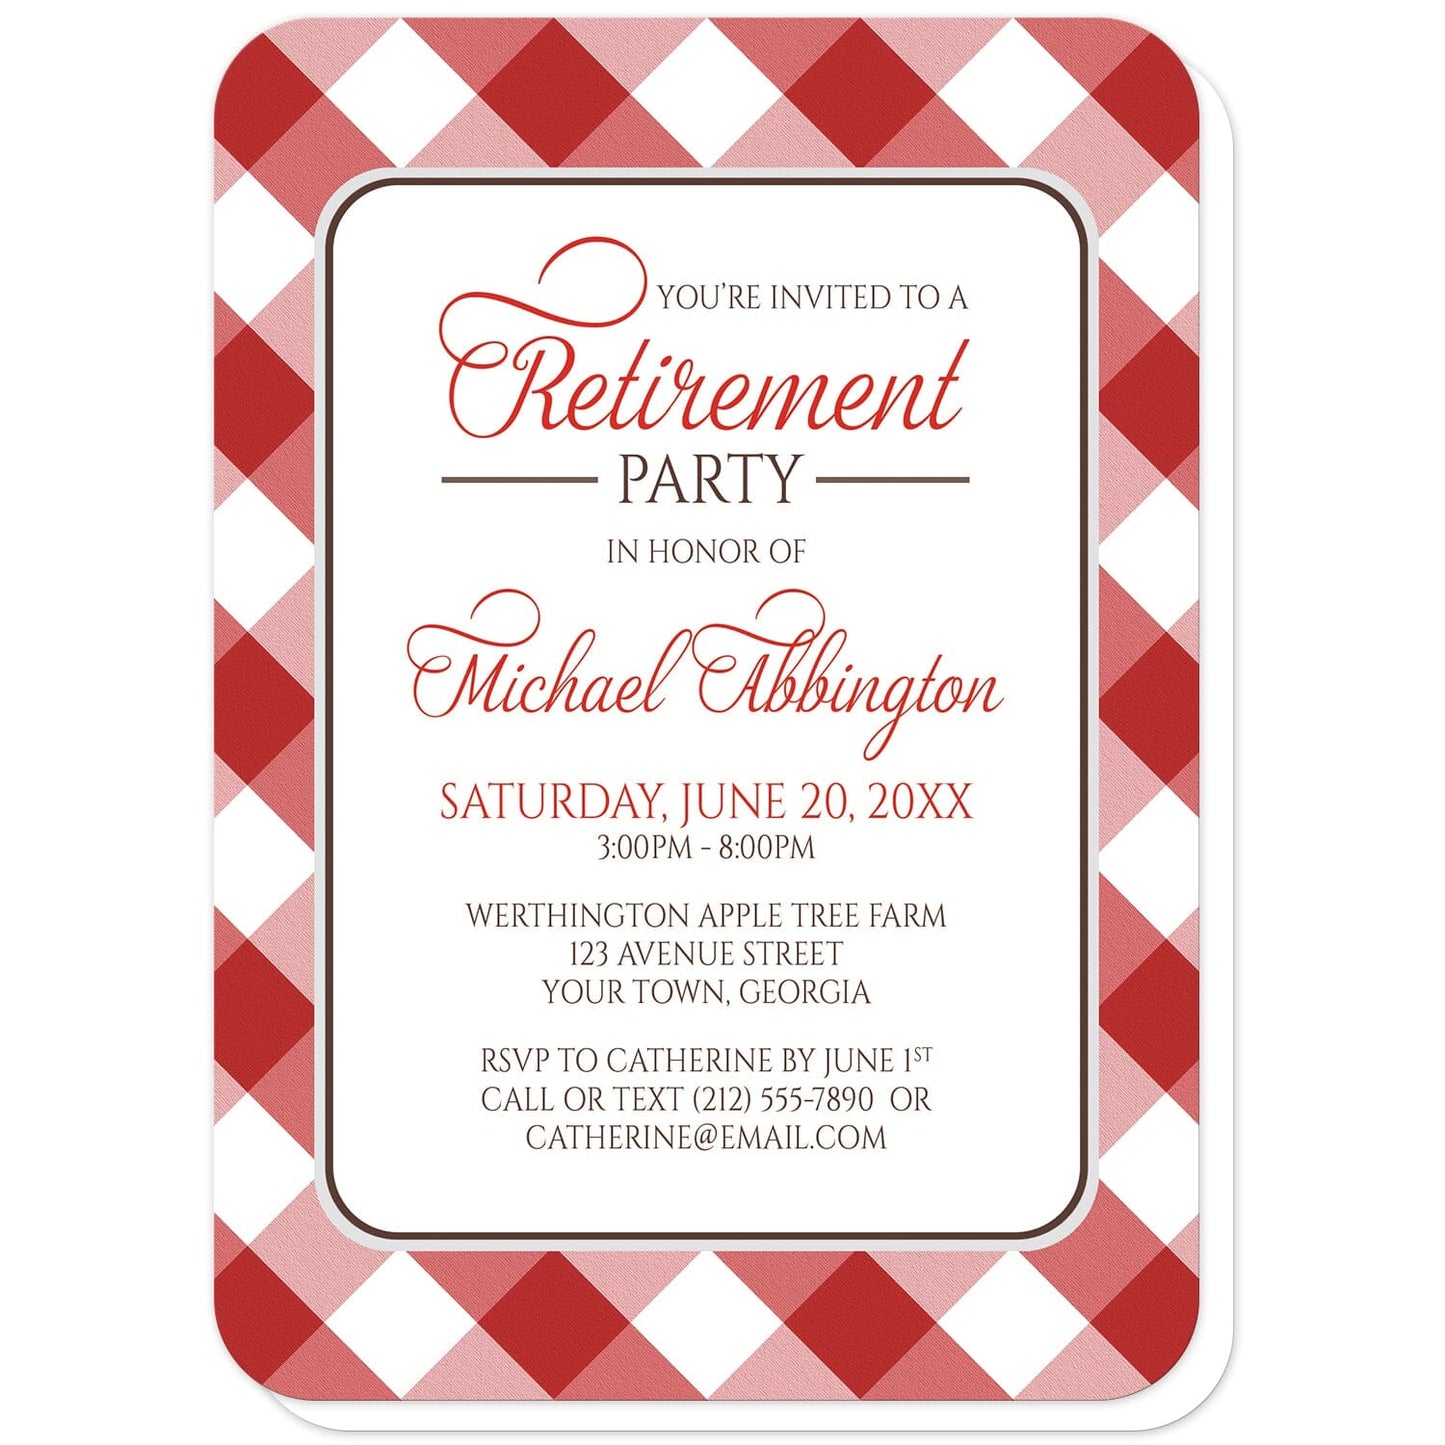 Red Gingham Retirement Invitations (with rounded corners) at Artistically Invited. Red gingham retirement invitations with your personalized party details custom printed in red and brown inside a white rectangular area outlined in brown and light gray. The background design of these red gingham retirement invitations is a diagonal red and white gingham pattern. 